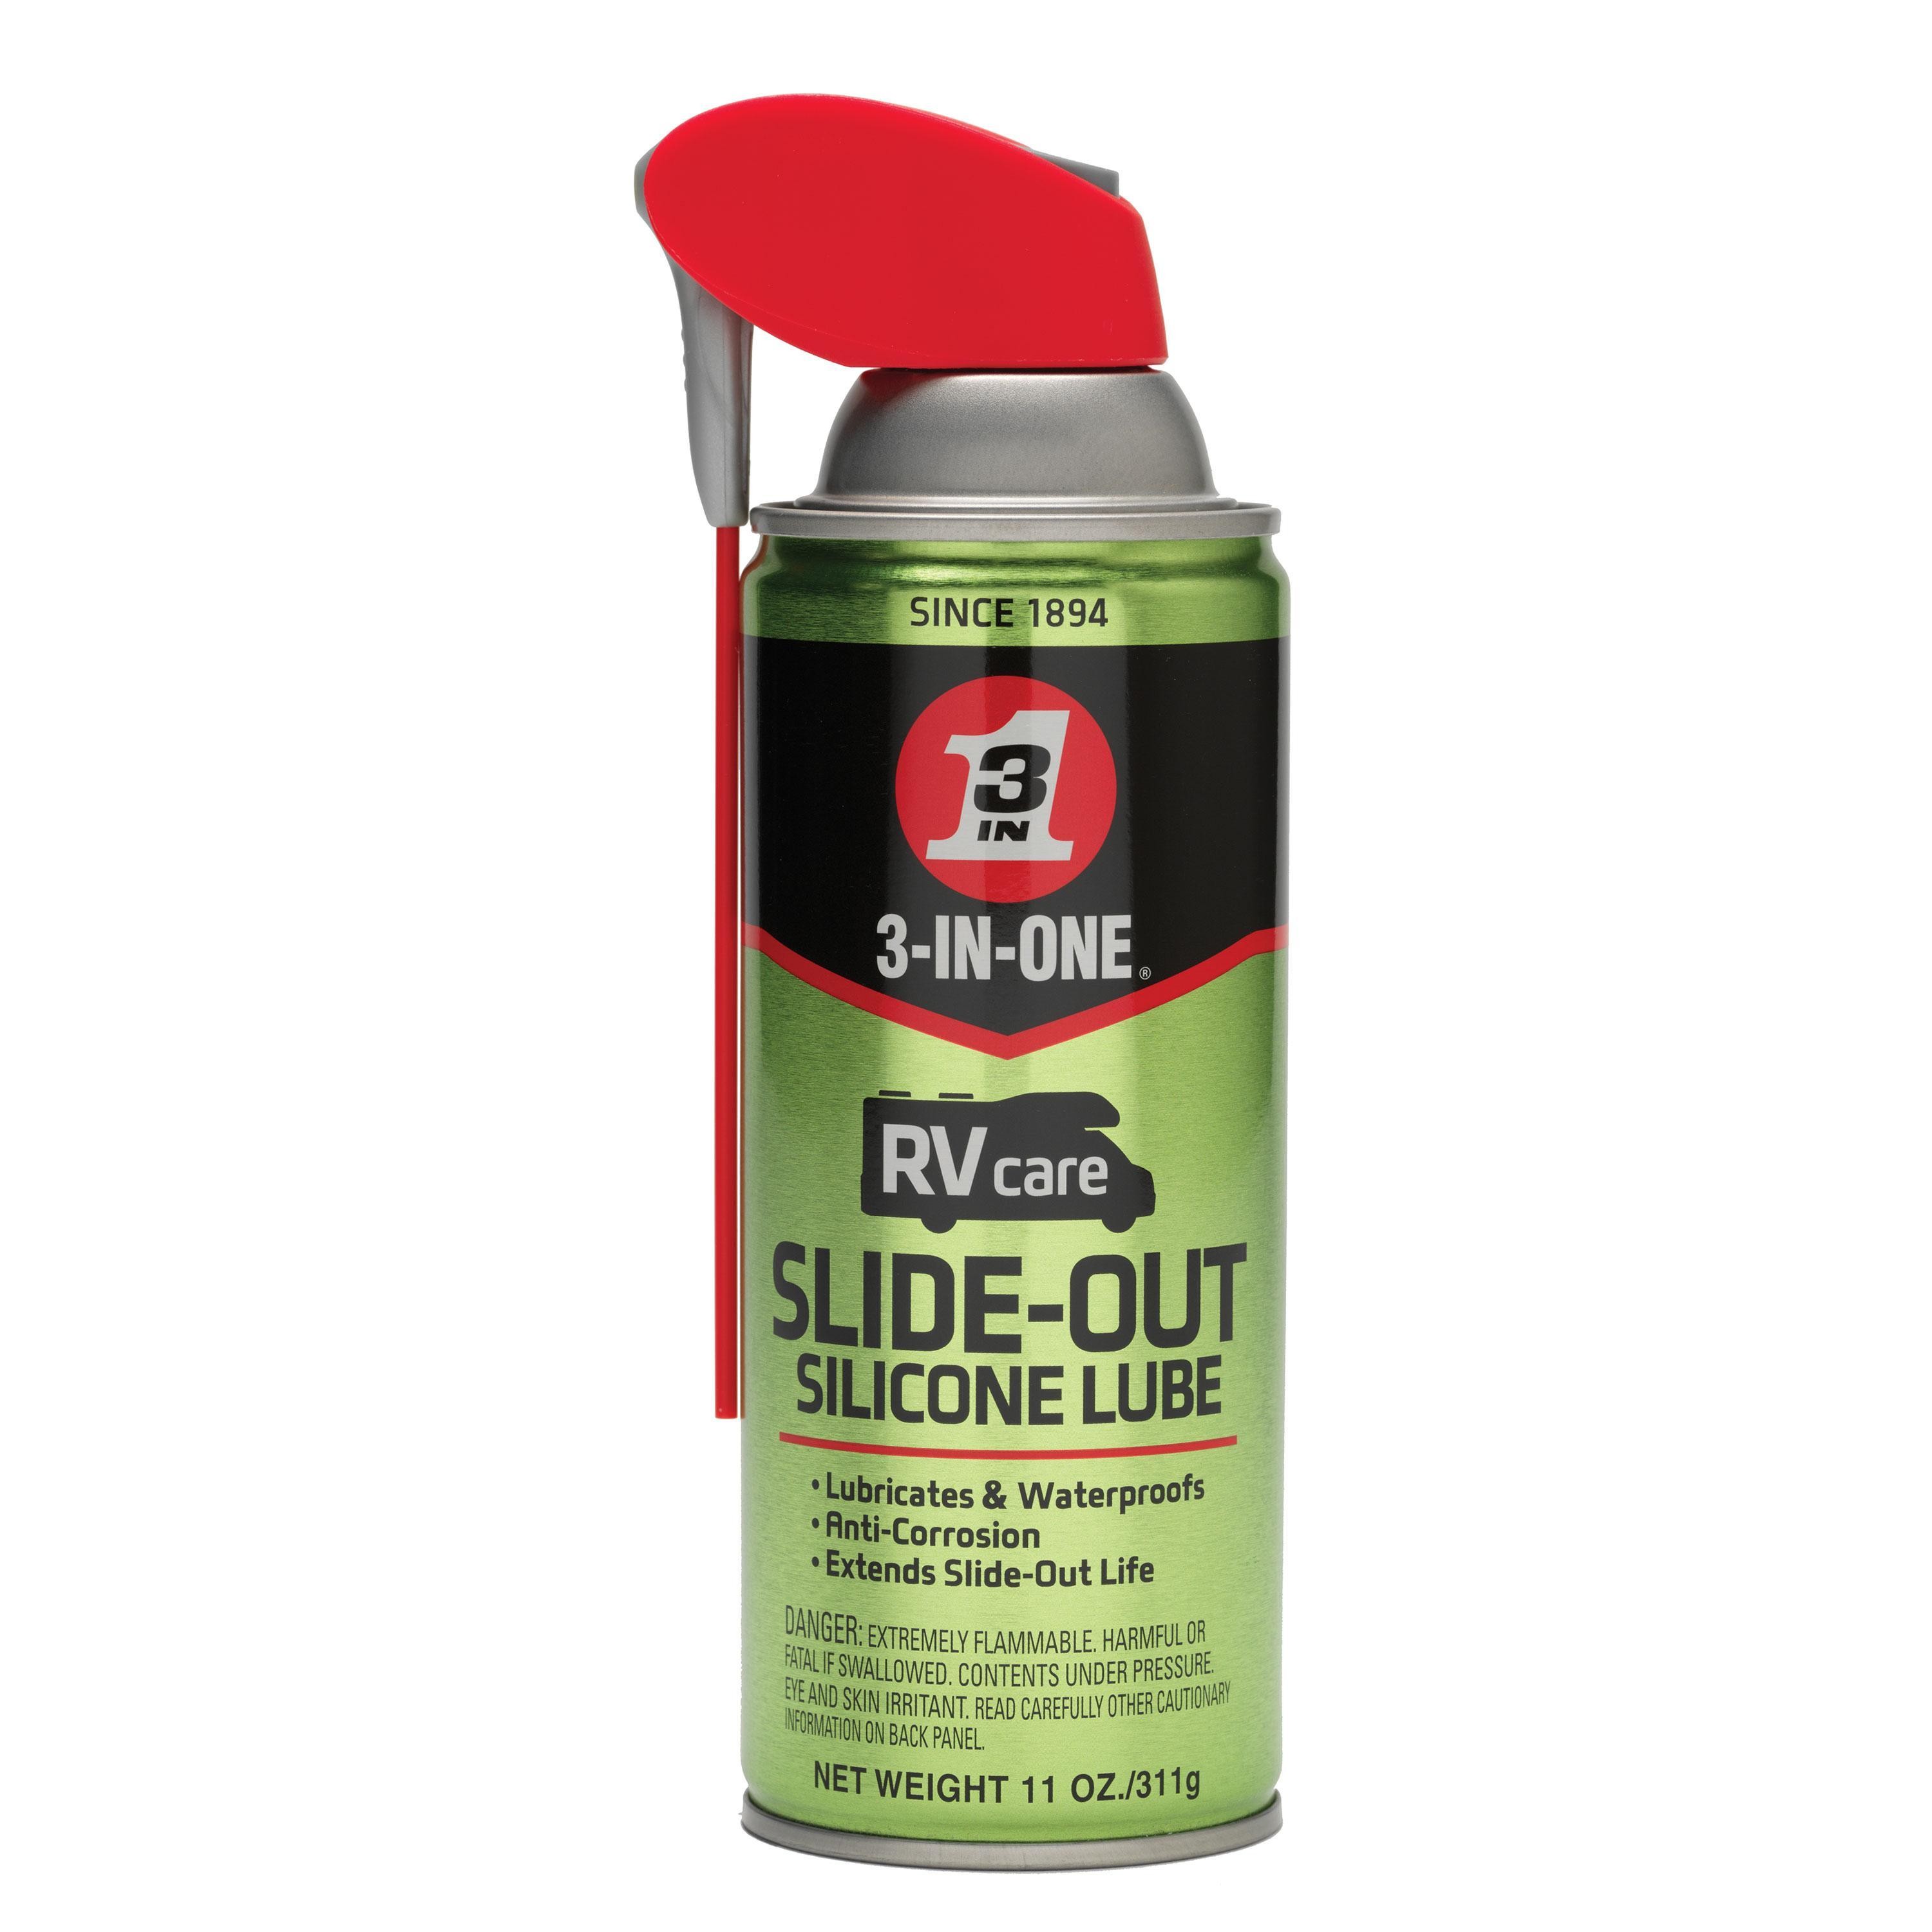 3-in-ONE Slide-Out Silicone Lube Spray for RVs